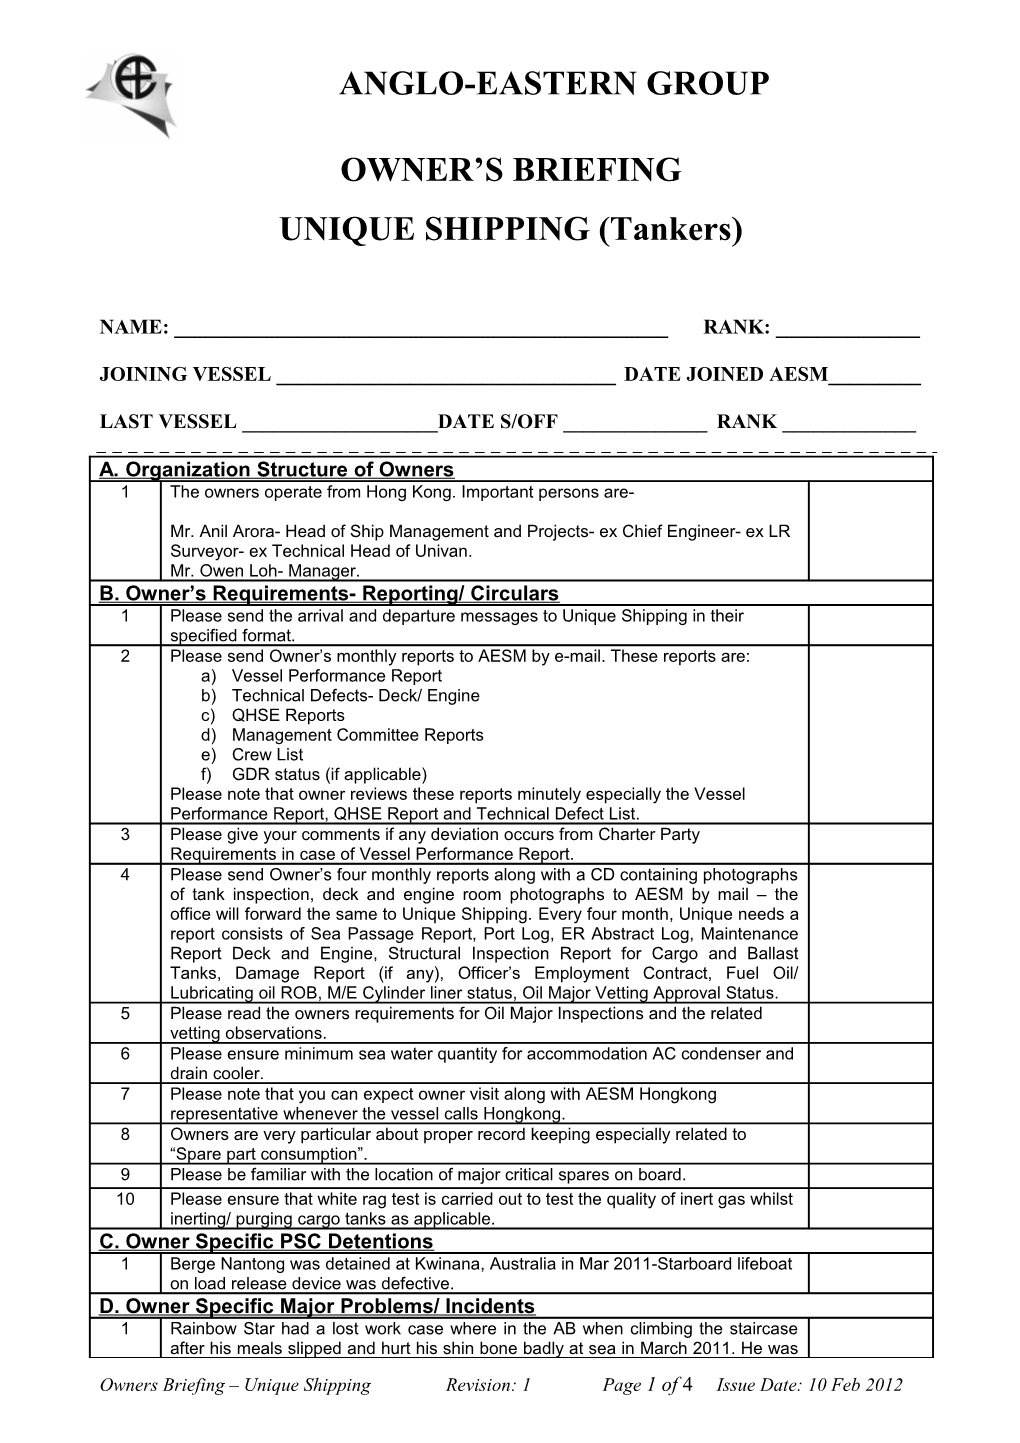 Owners Briefing- Unique Shipping (AE- Singapore)